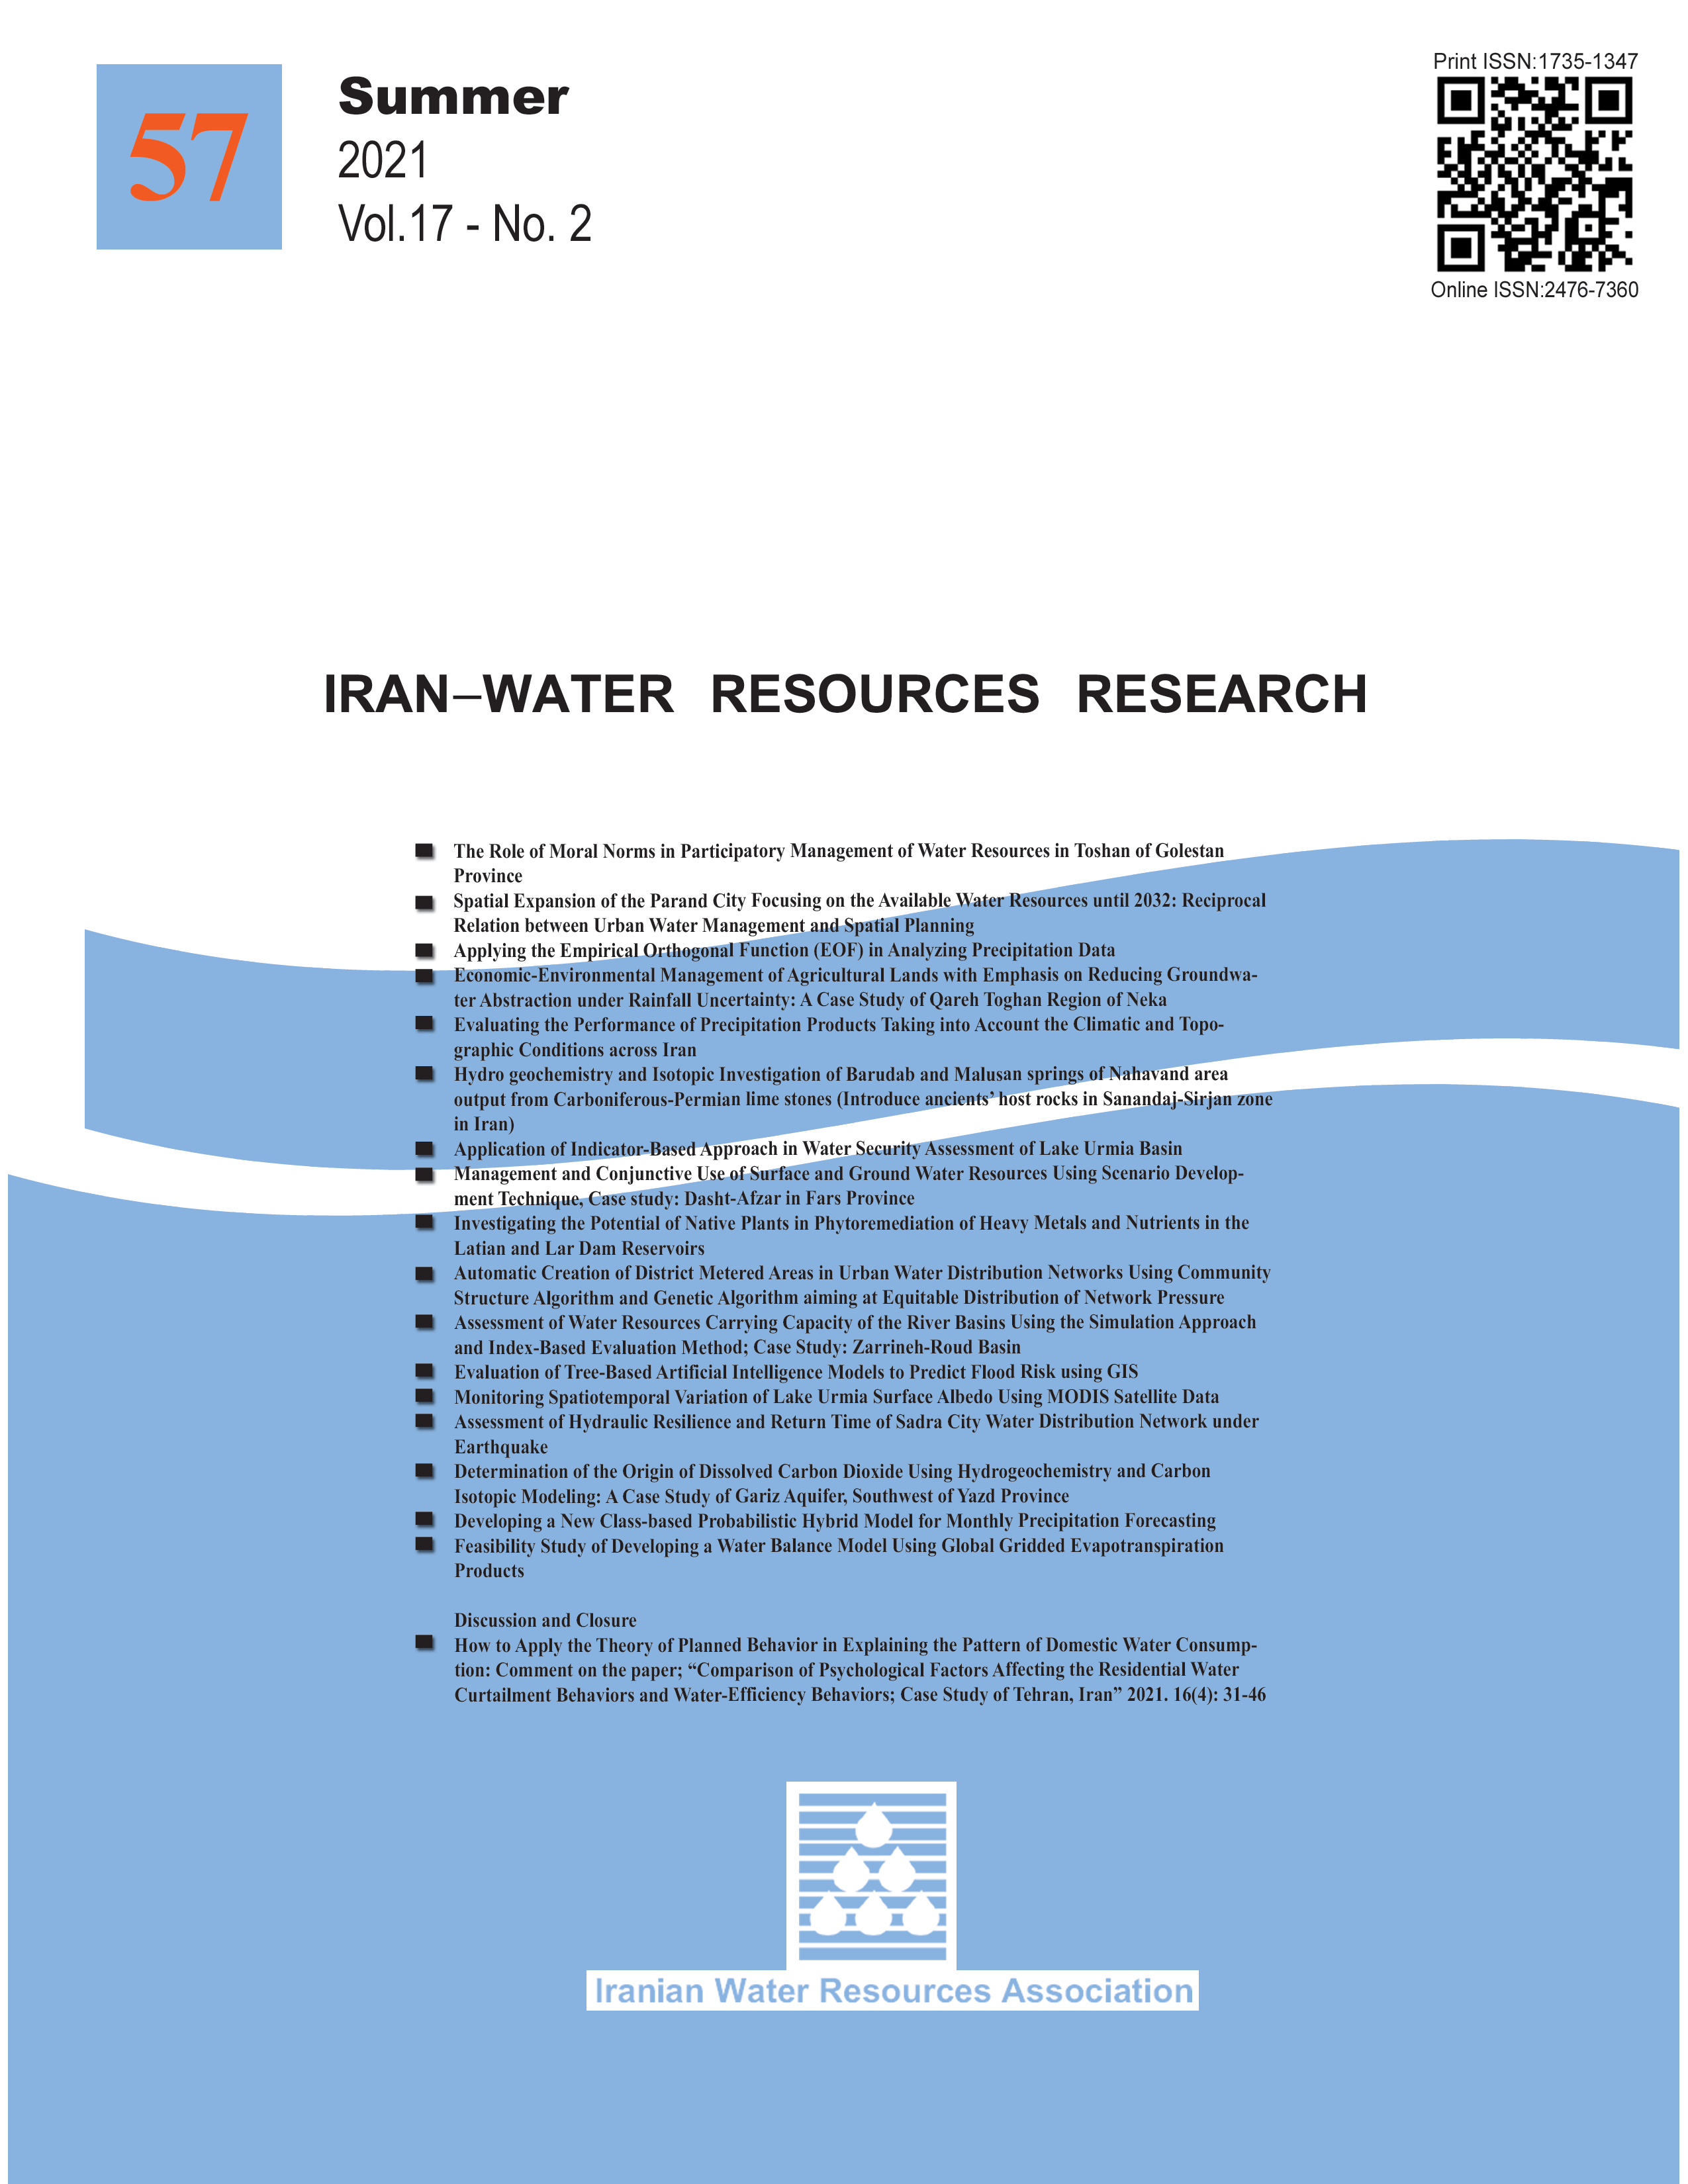 Iran-Water Resources Research